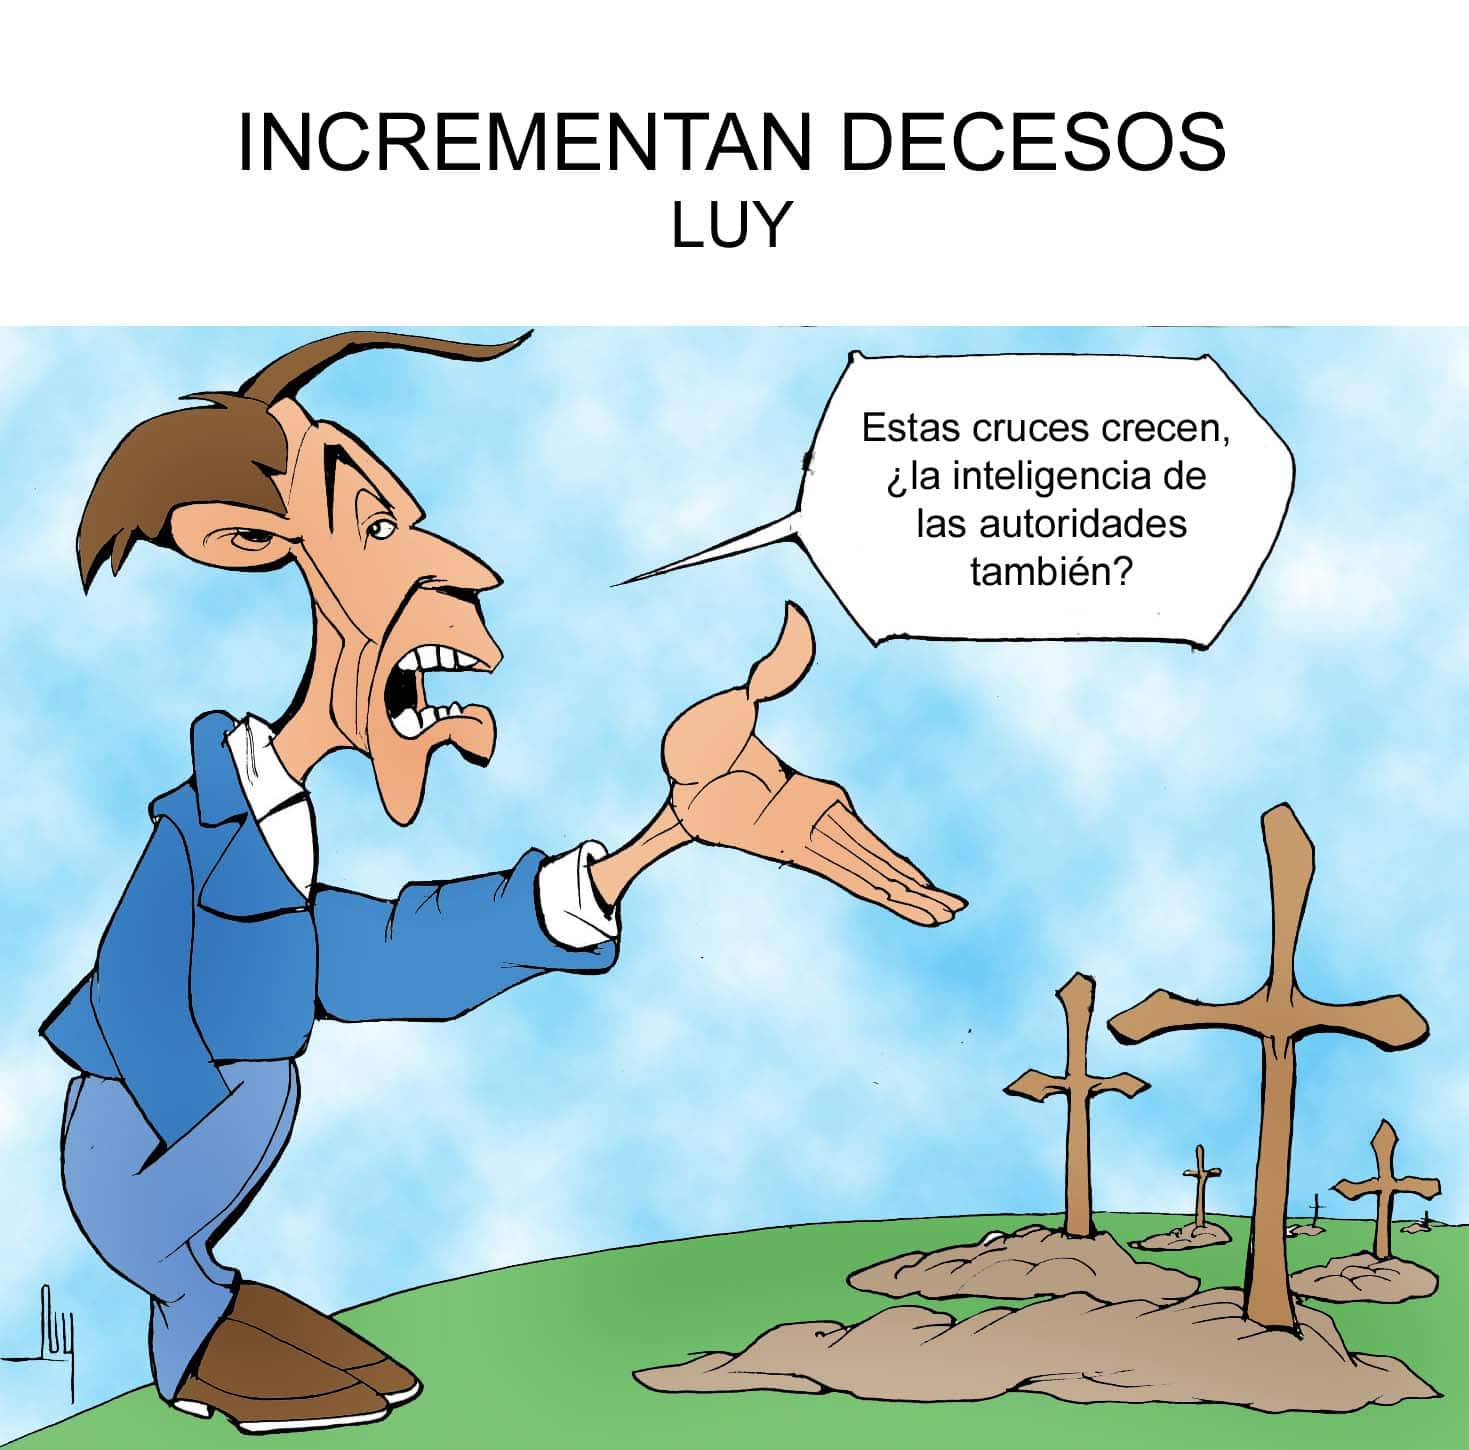 luy